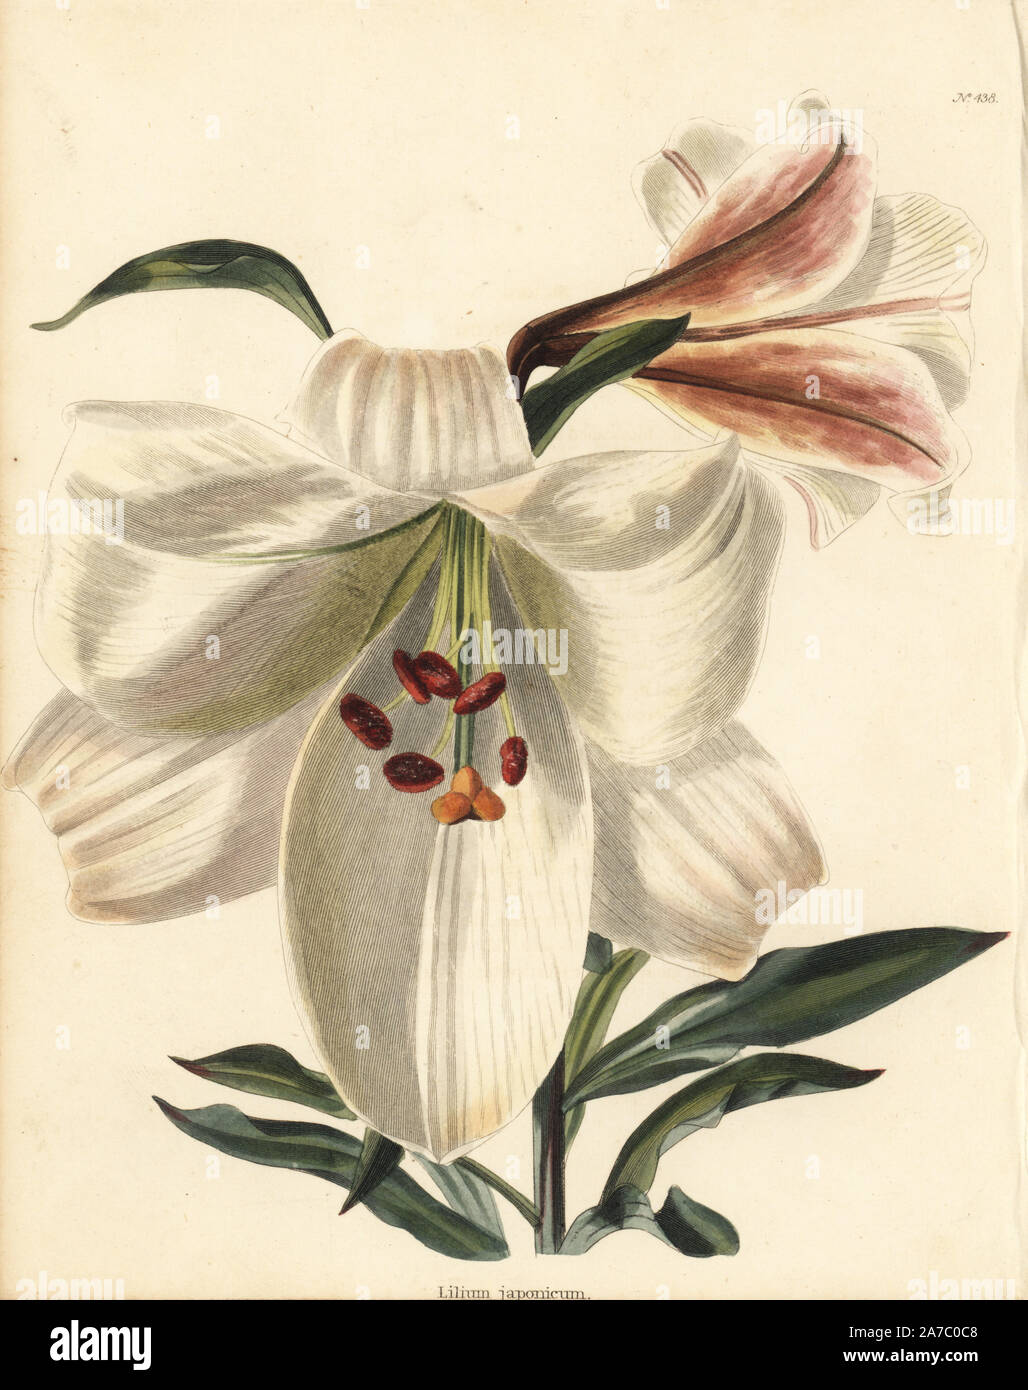 Bamboo lily, Lilium japonicum. Handcoloured copperplate engraving by George Cooke from Conrad Loddiges' Botanical Cabinet, London, 1810. Stock Photo